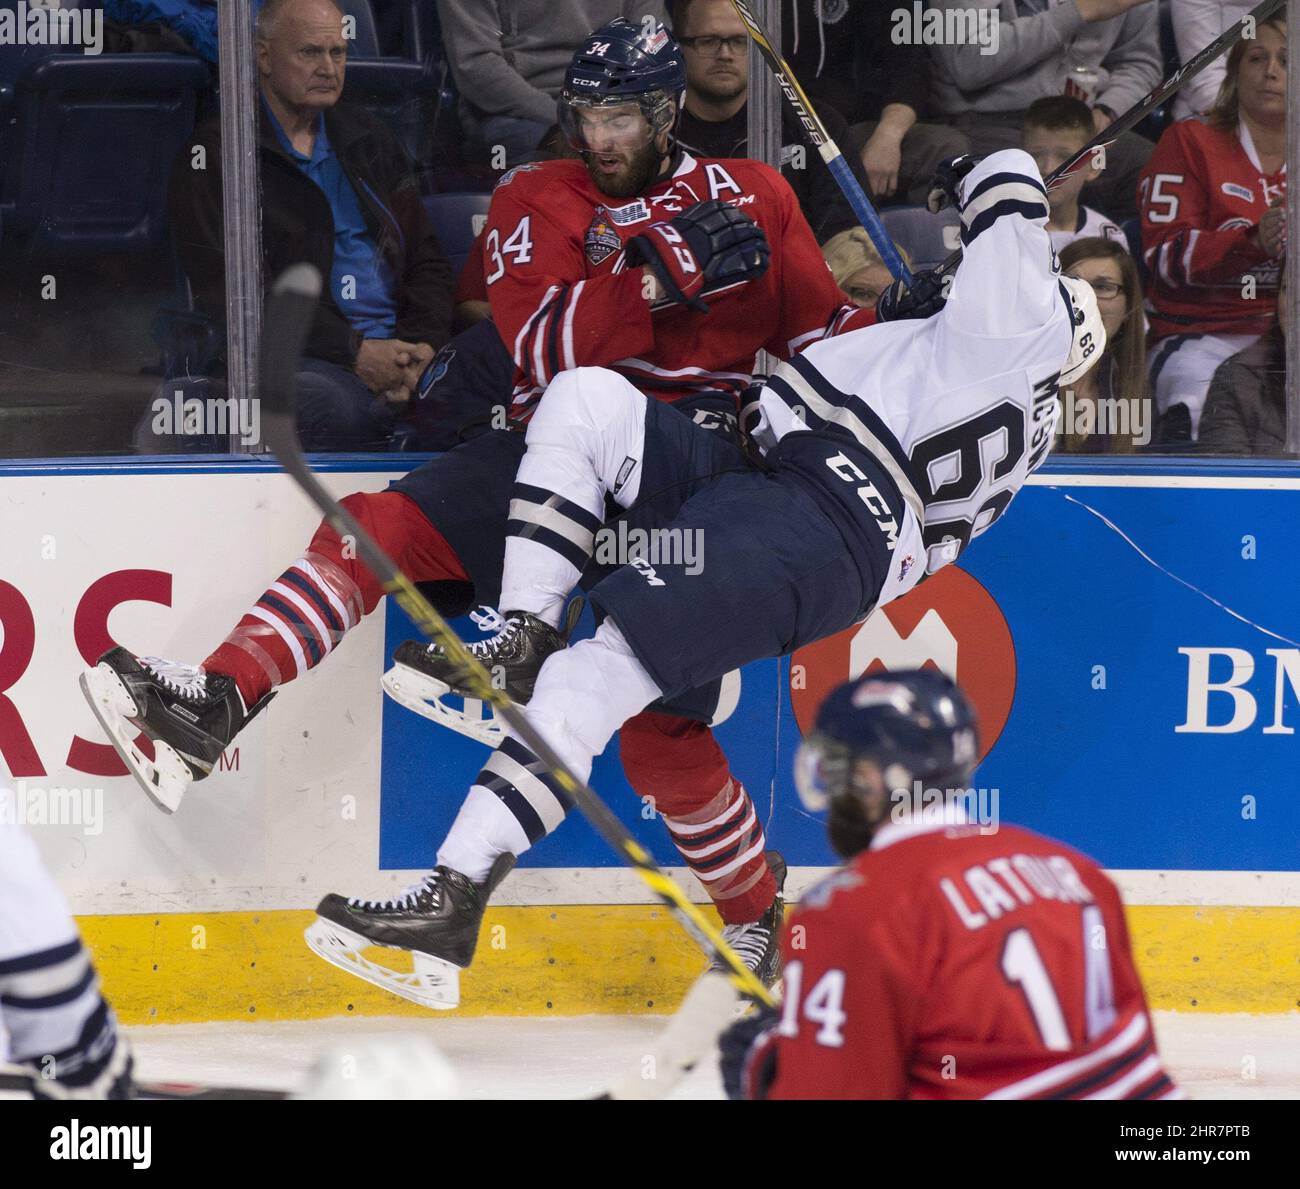 Rimouski Oceanics' Guillaume McSween falls back when colliding with Oshawa Generals' Hunter Smith during second period action Saturday, May 23, 2015 at the Memorial Cup tournament in Quebec City. THE CANADIAN PRESS/Jacques Boissinot Stock Photo